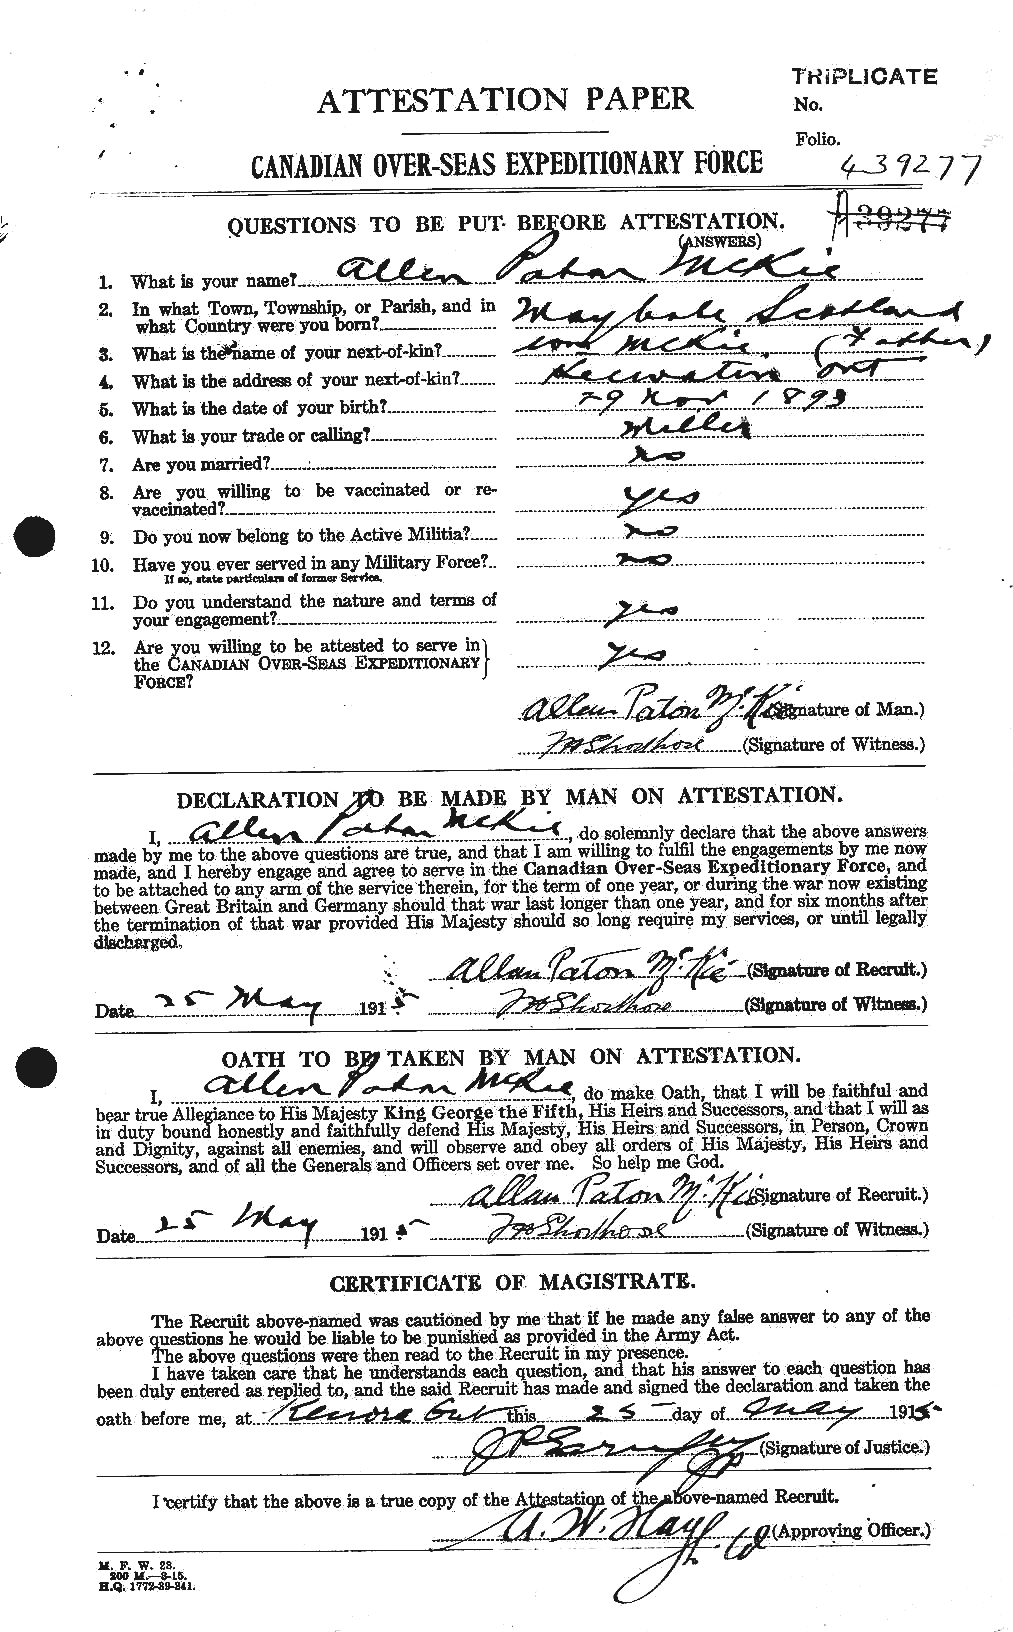 Personnel Records of the First World War - CEF 533731a